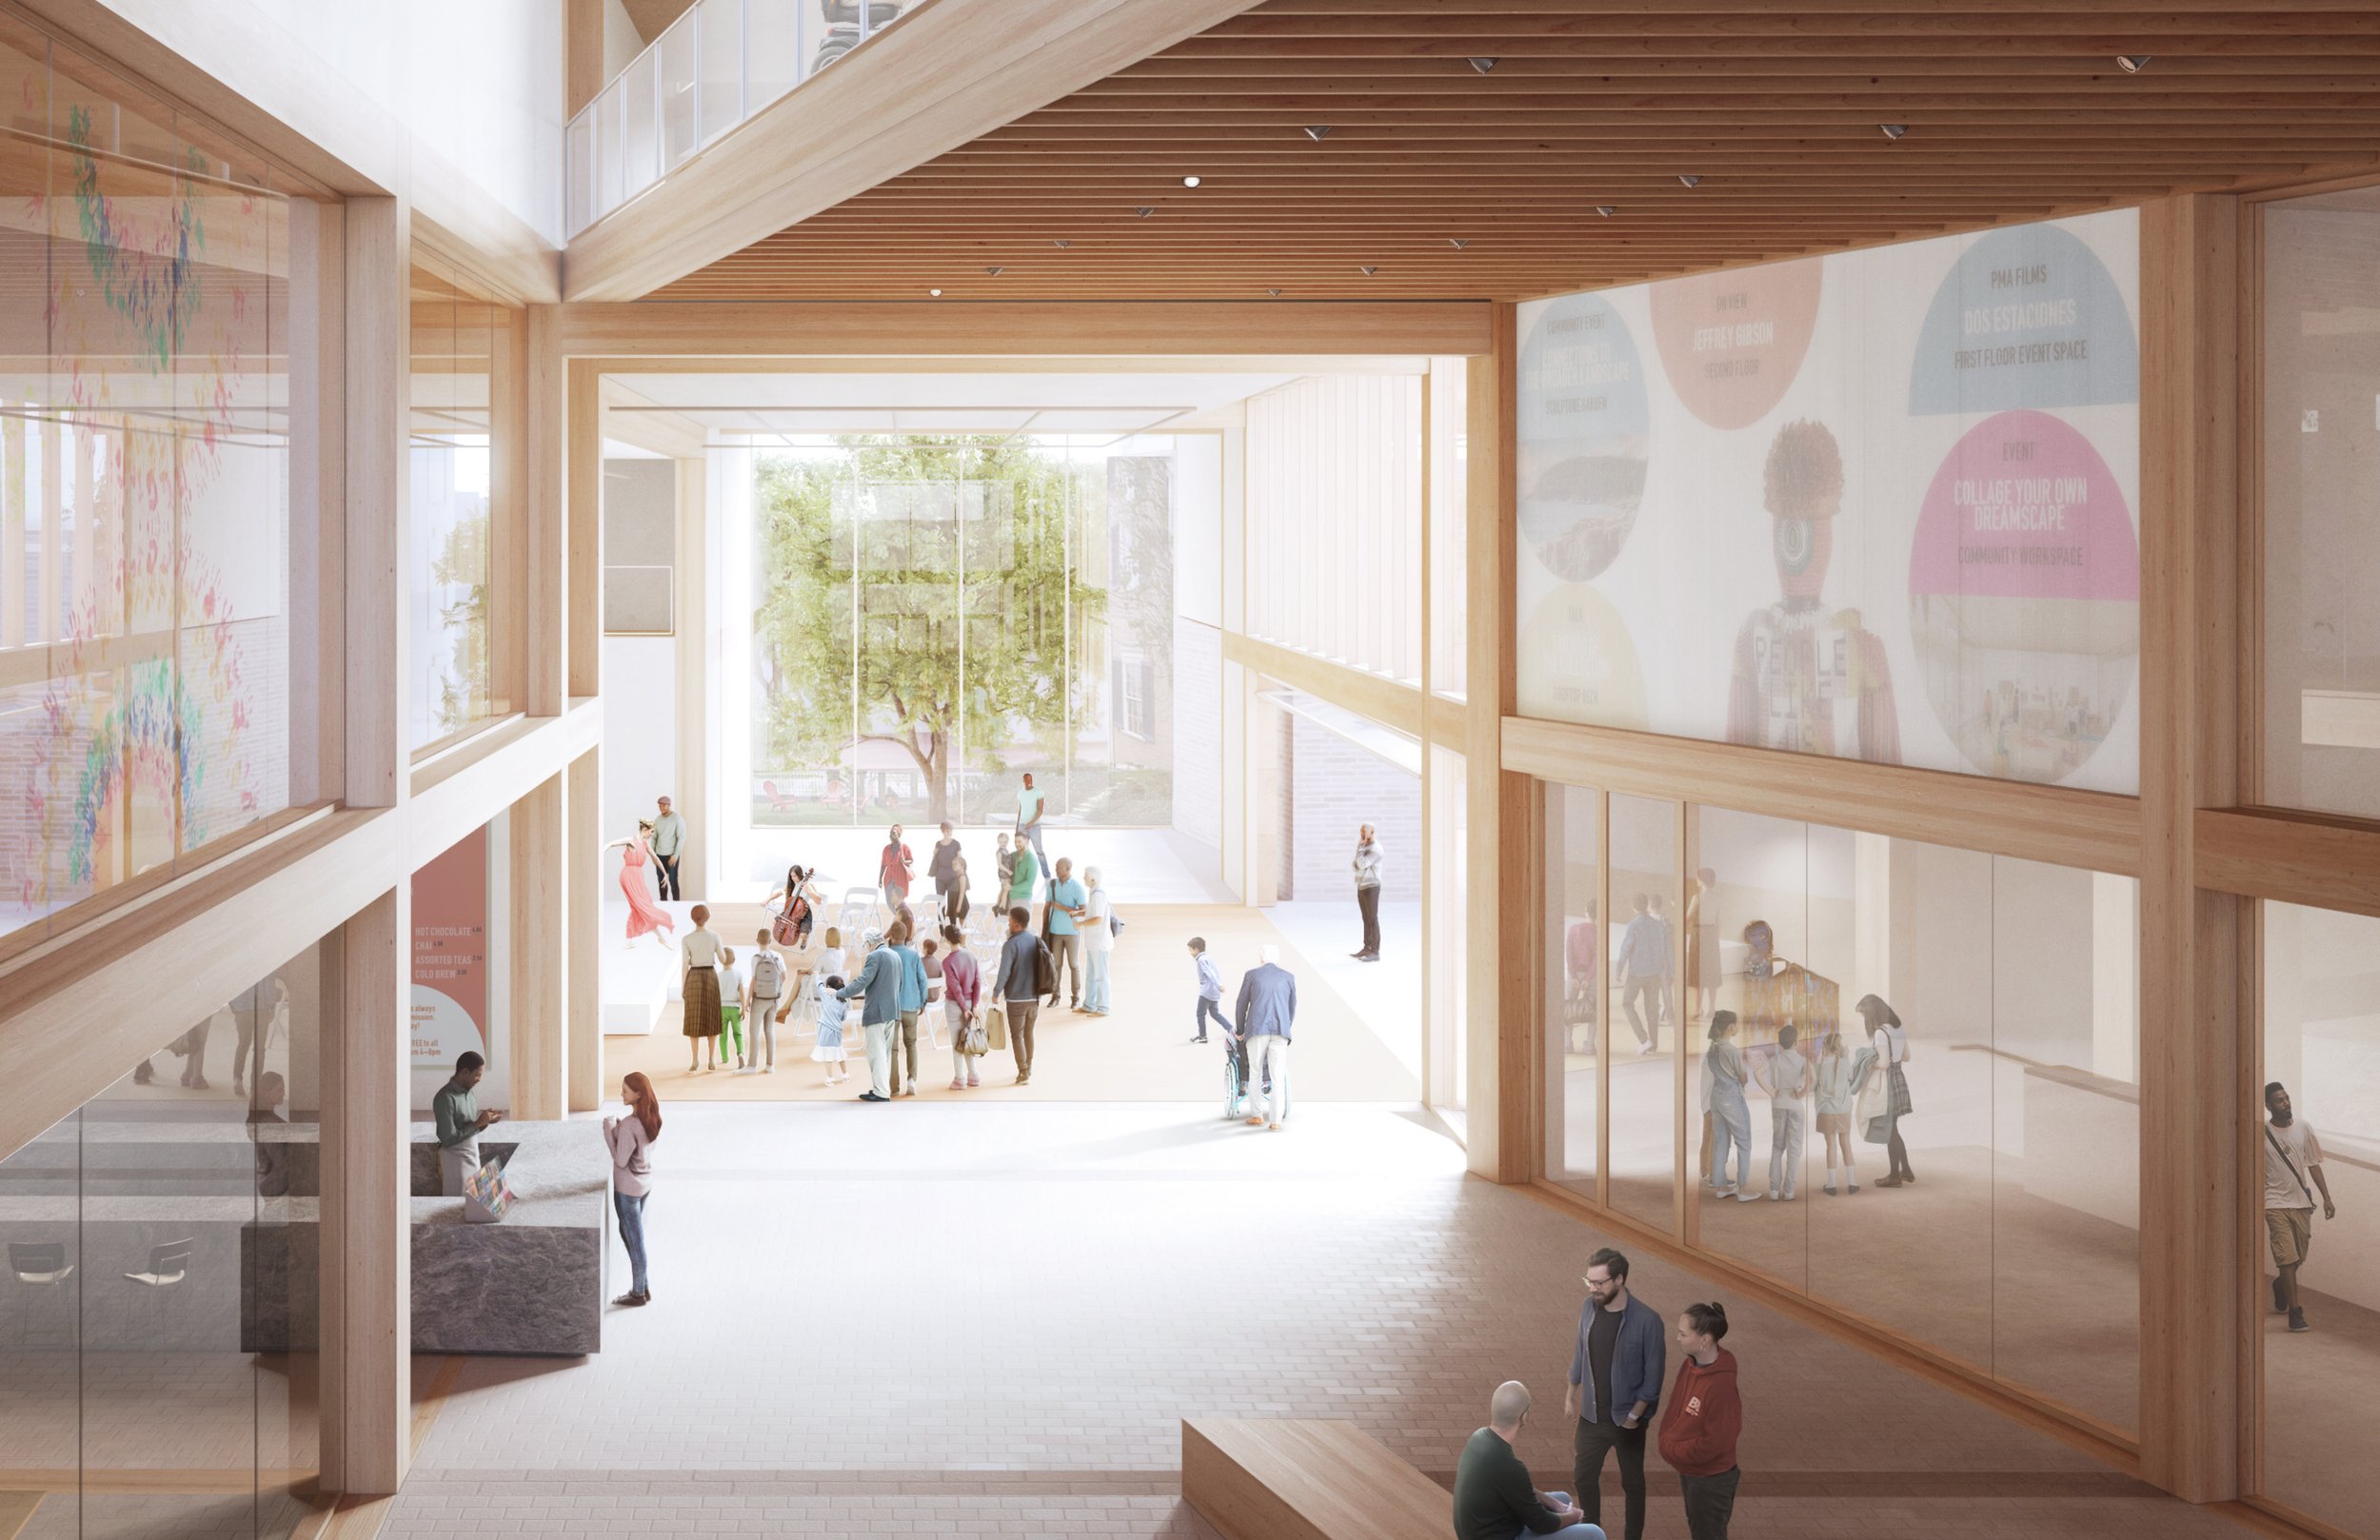  New Wing Interior. Image courtesy of Portland Museum of Art, Maine / LEVER Architecture / Dovetail Design Strategists 